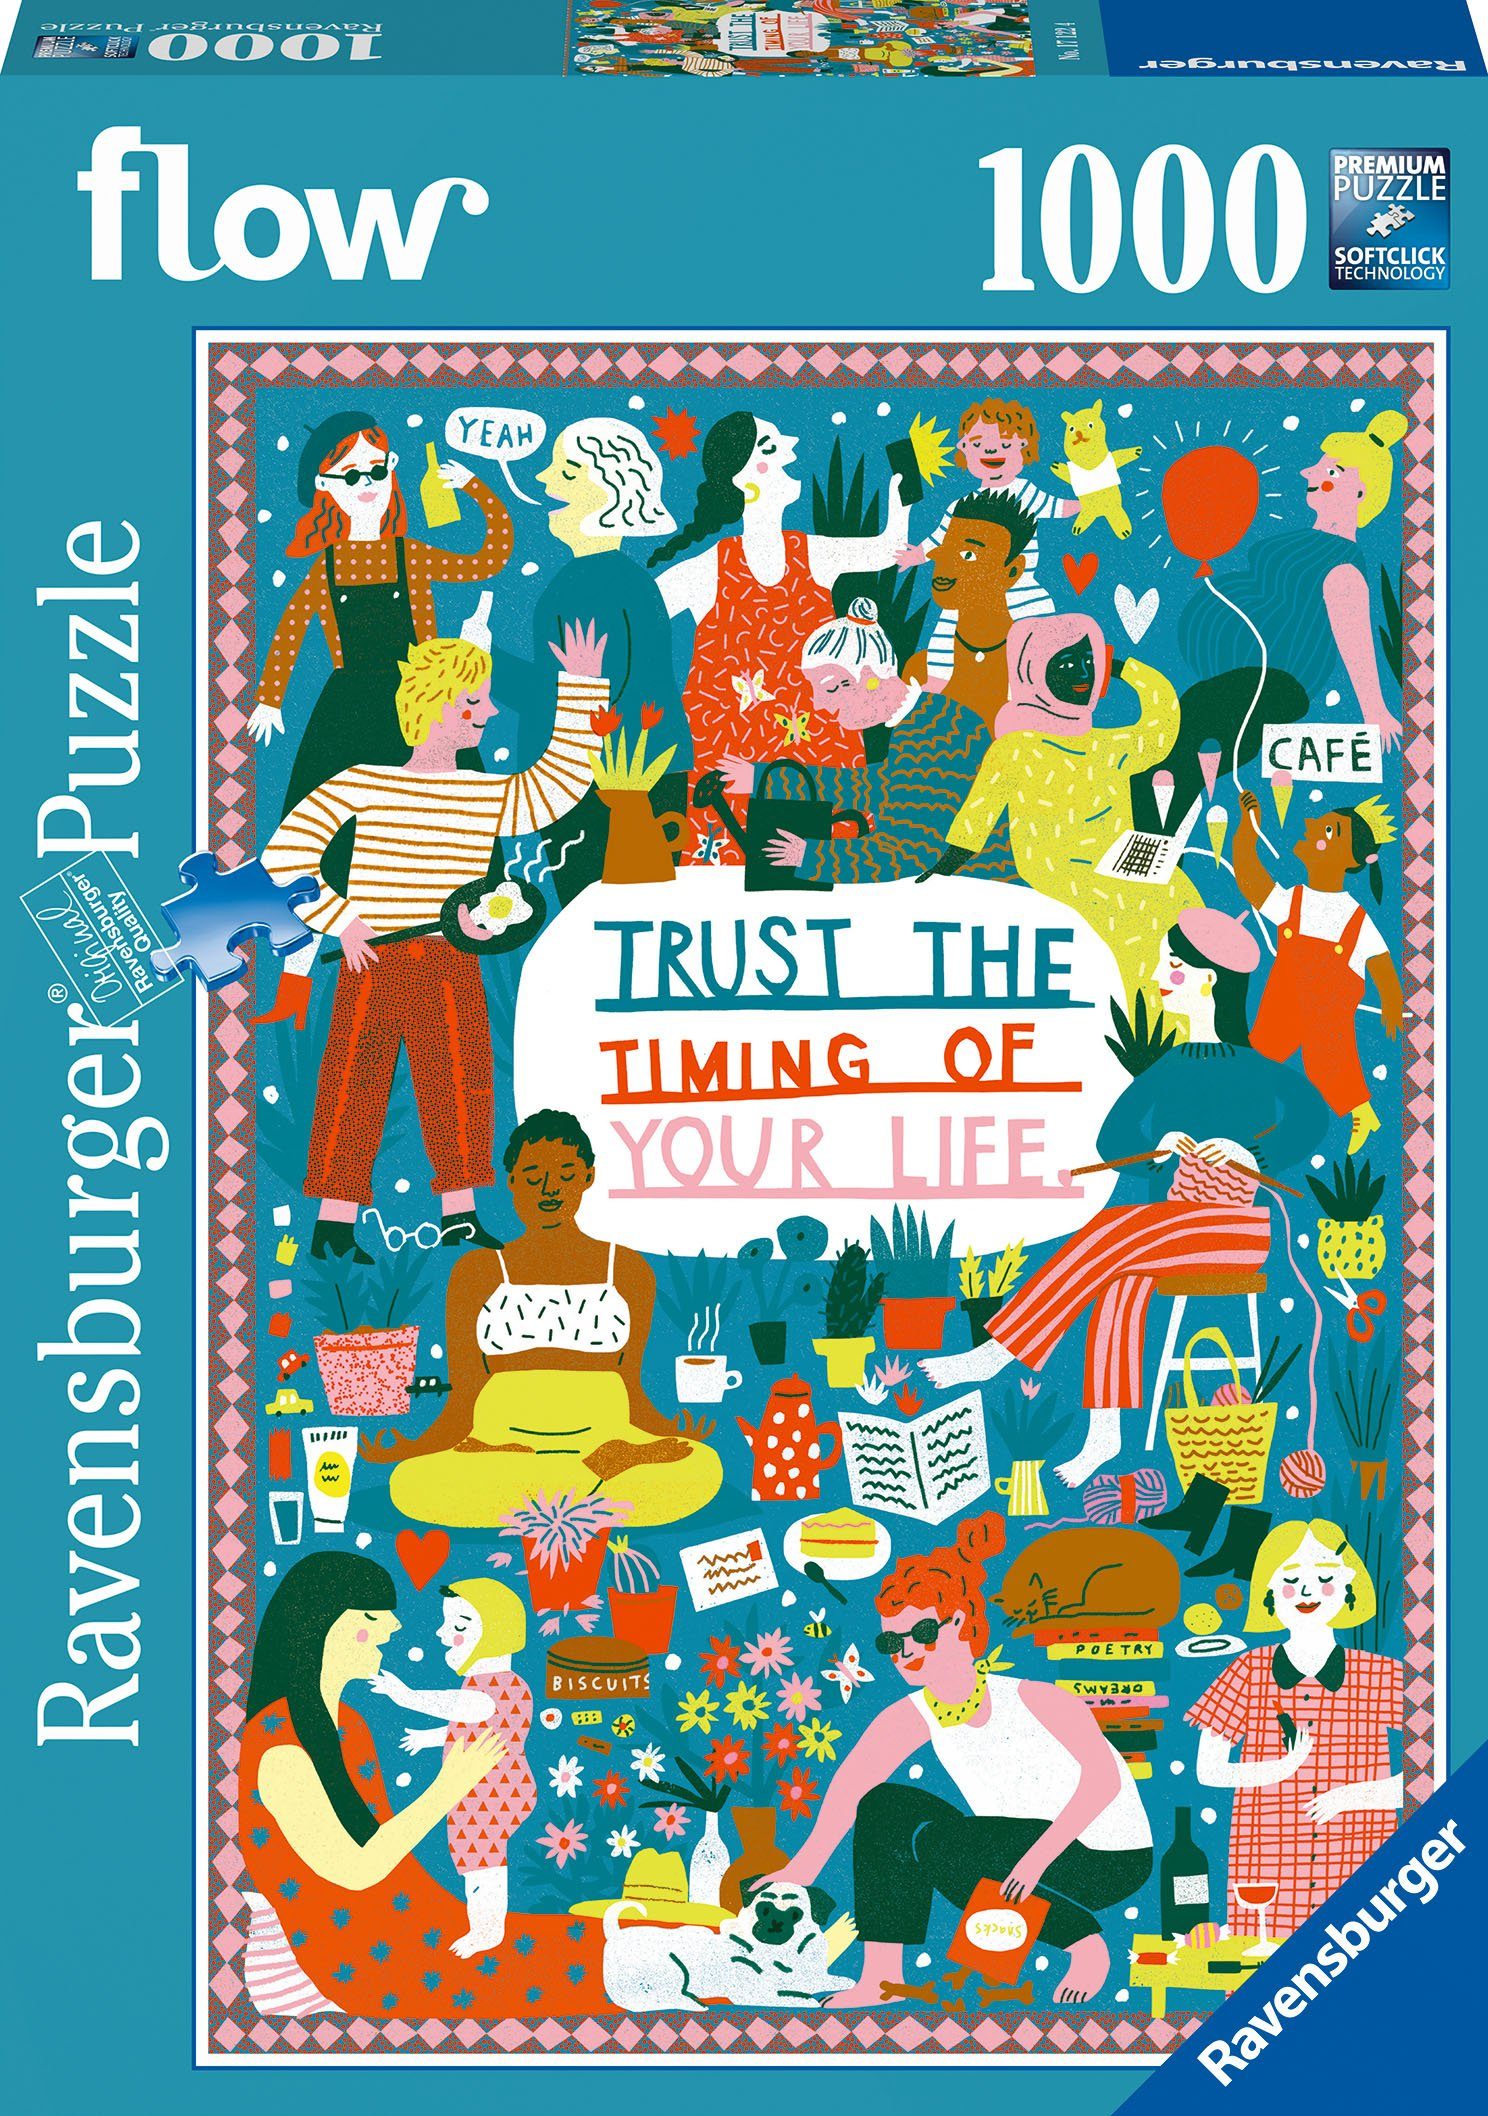 Ravensburger Puzzle Trust Timing of your Life, 1000 Puzzleteile, Made in Germany, FSC® - schützt Wald - weltweit